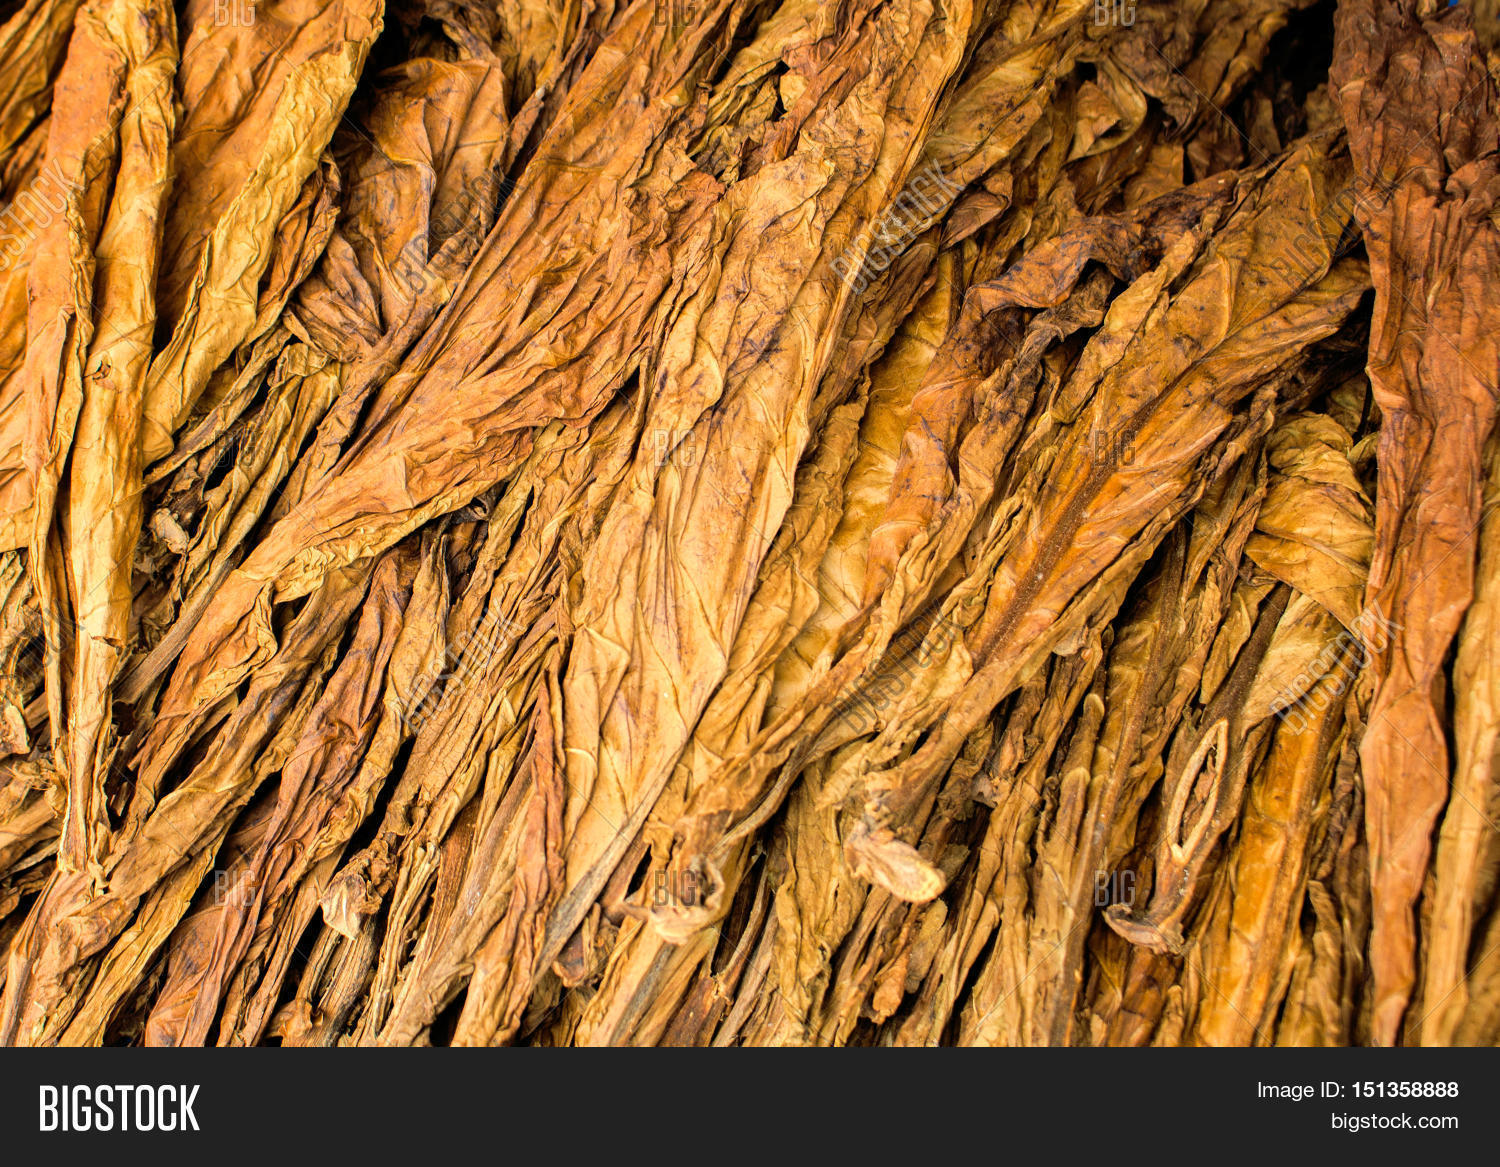 #closeup - Dried Tobacco Leaves , HD Wallpaper & Backgrounds